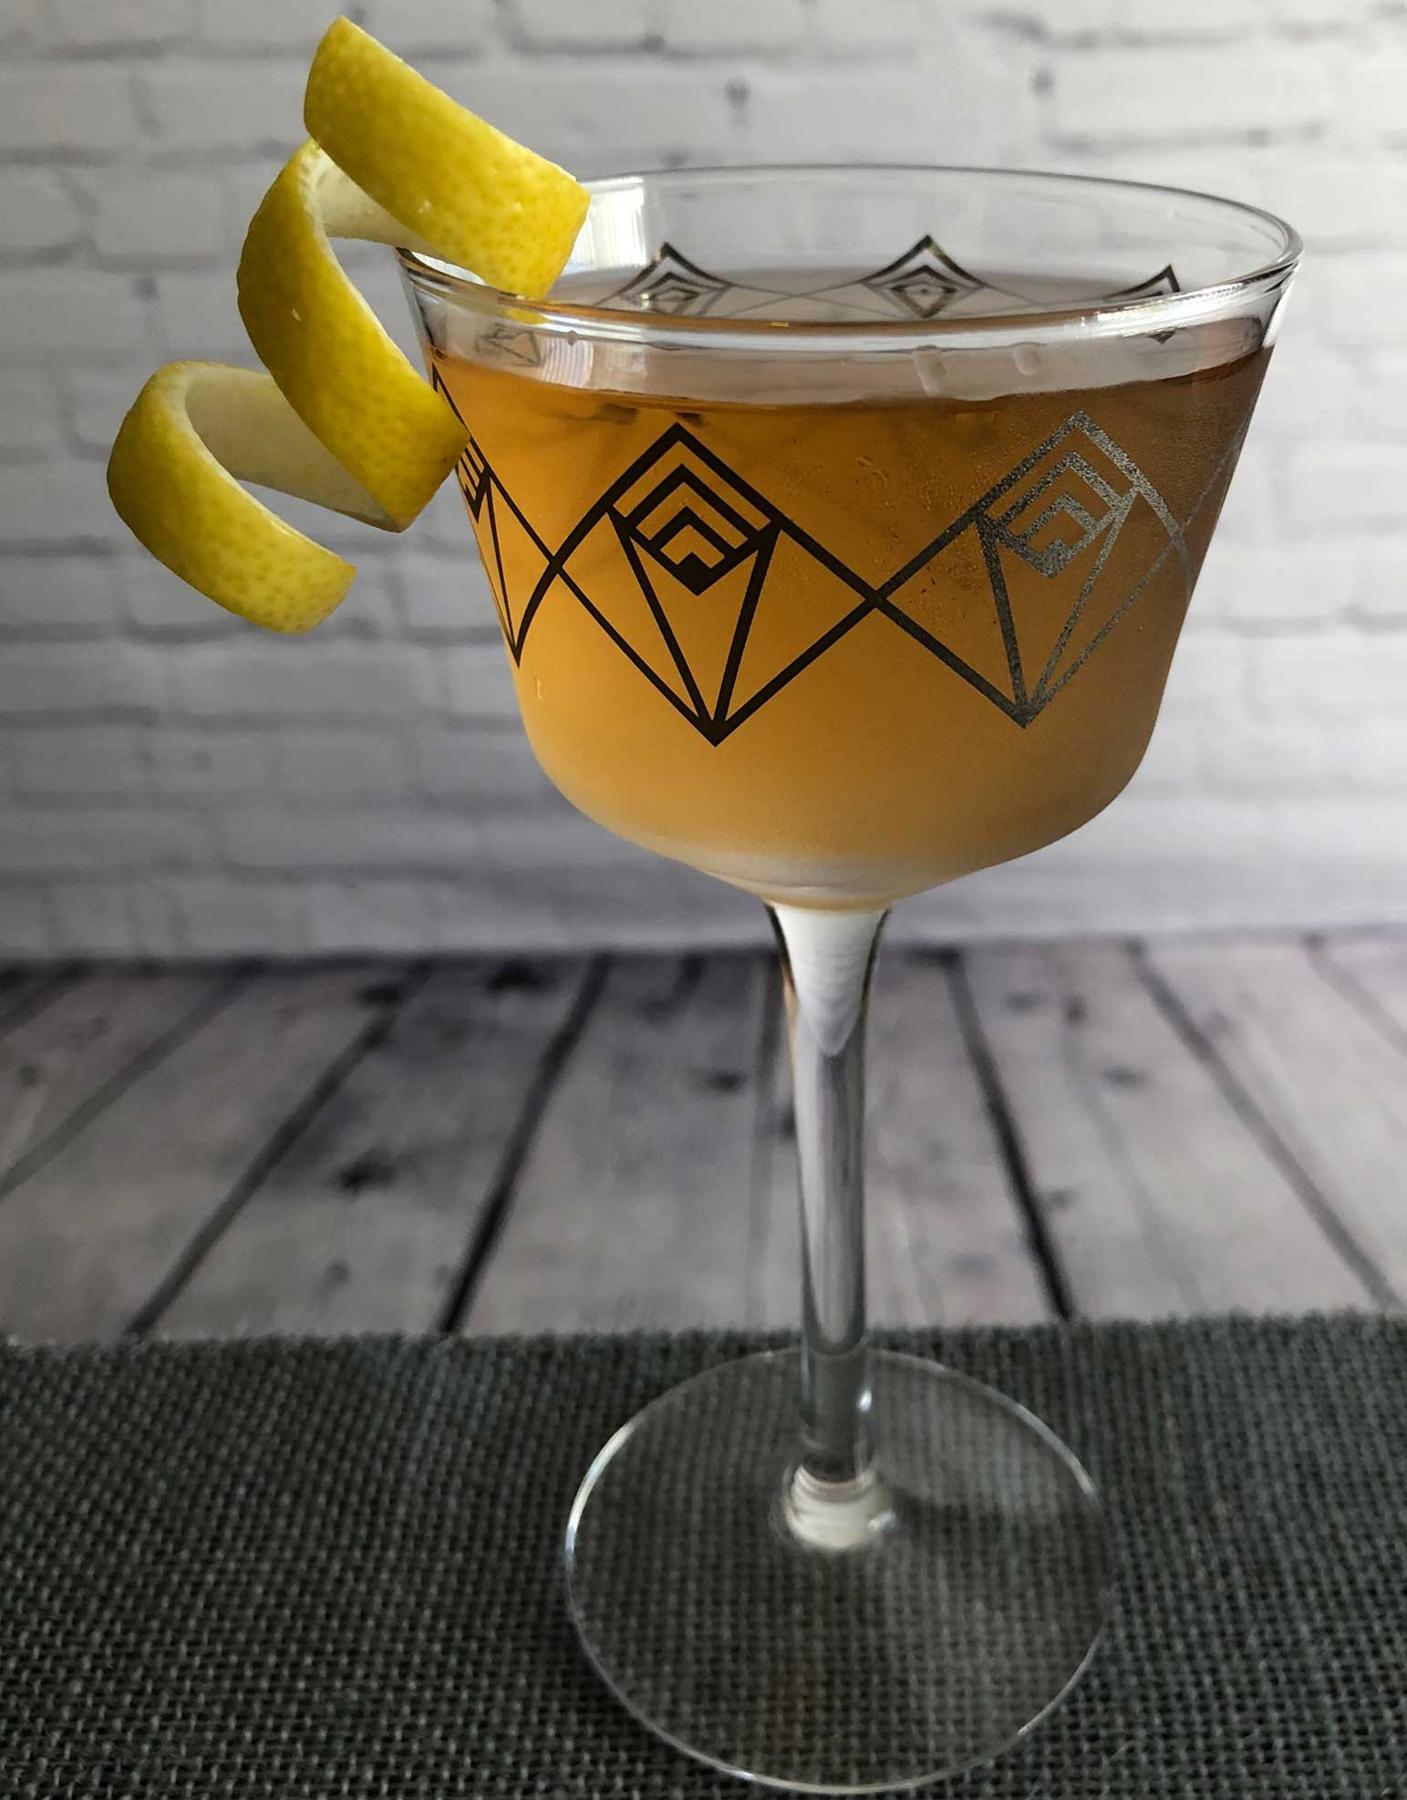 An example of the Prince Henry’s Reed, the mixed drink (drink) featuring Henriques & Henriques Rainwater Madeira, Dolin Dry Vermouth de Chambéry, orange bitters, and lemon twist; photo by Lee Edwards